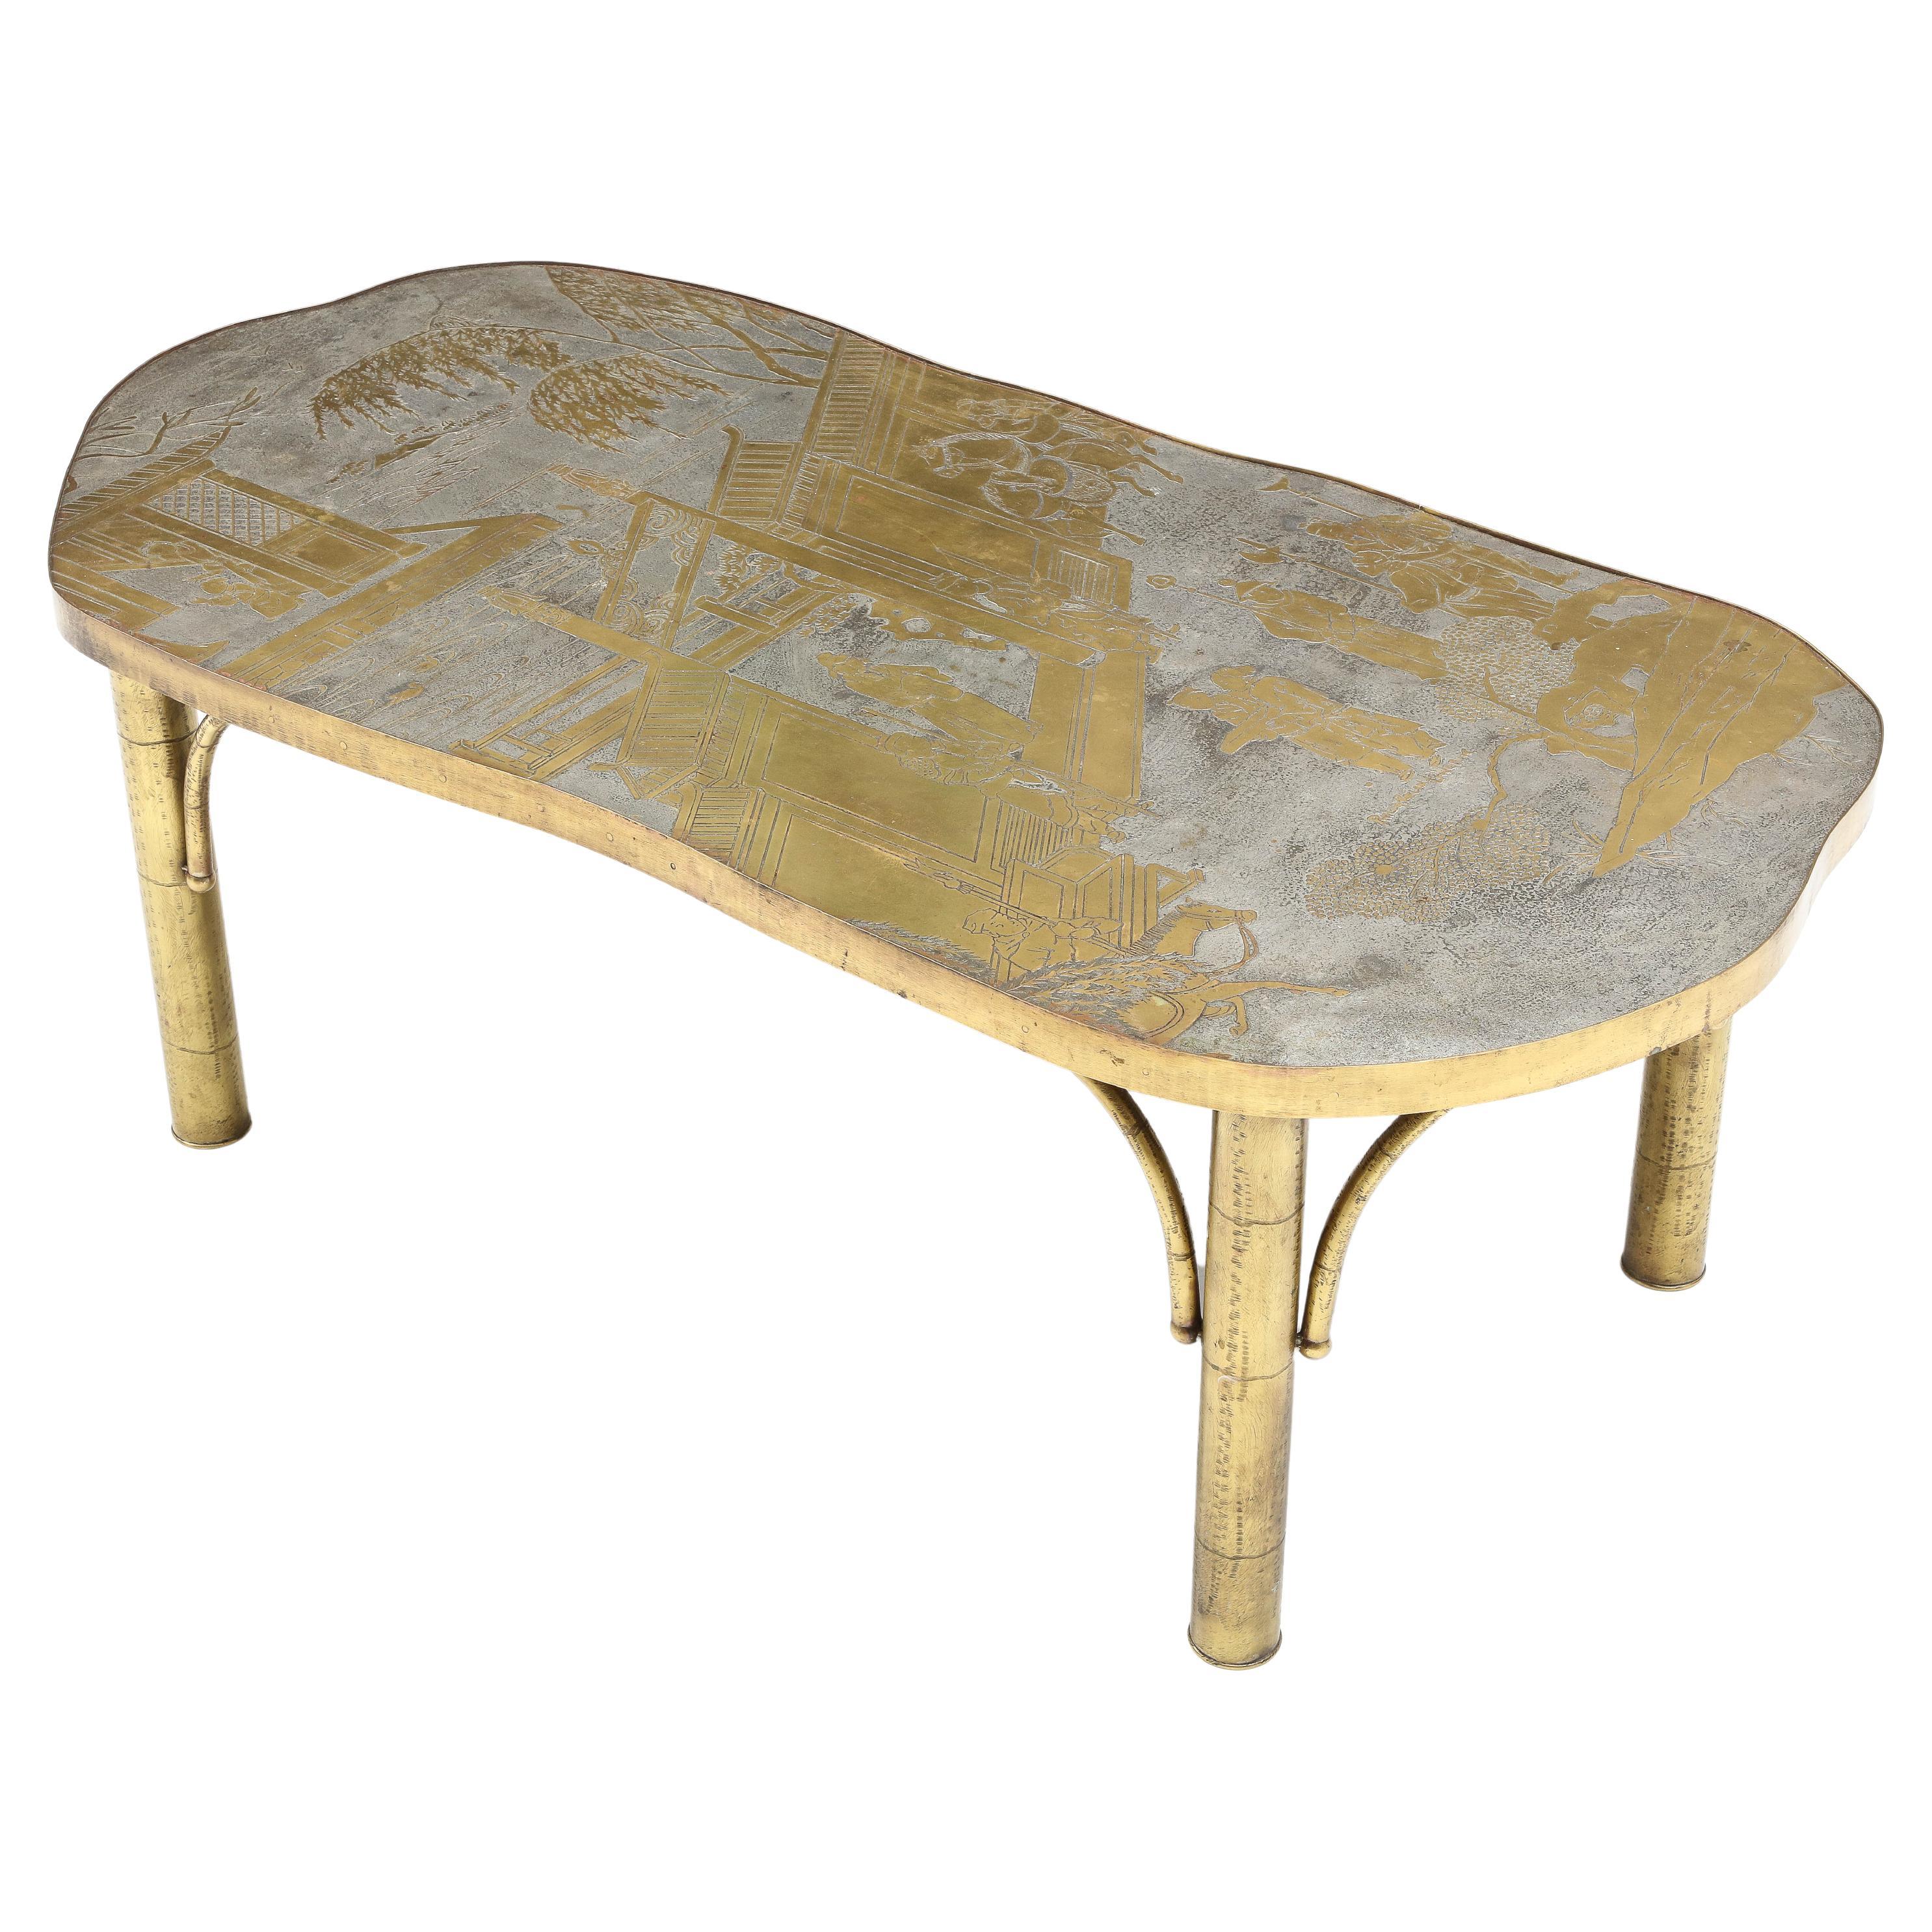 Phillip and Kelvin LaVern lovely Chan coffee or cocktail table in acid-etched patinated, and polychromed bronze and pewter, USA, 1960s. This iconic LaVerne table model design is called the House of Happiness (Chan #140) and it depicts a ceremony